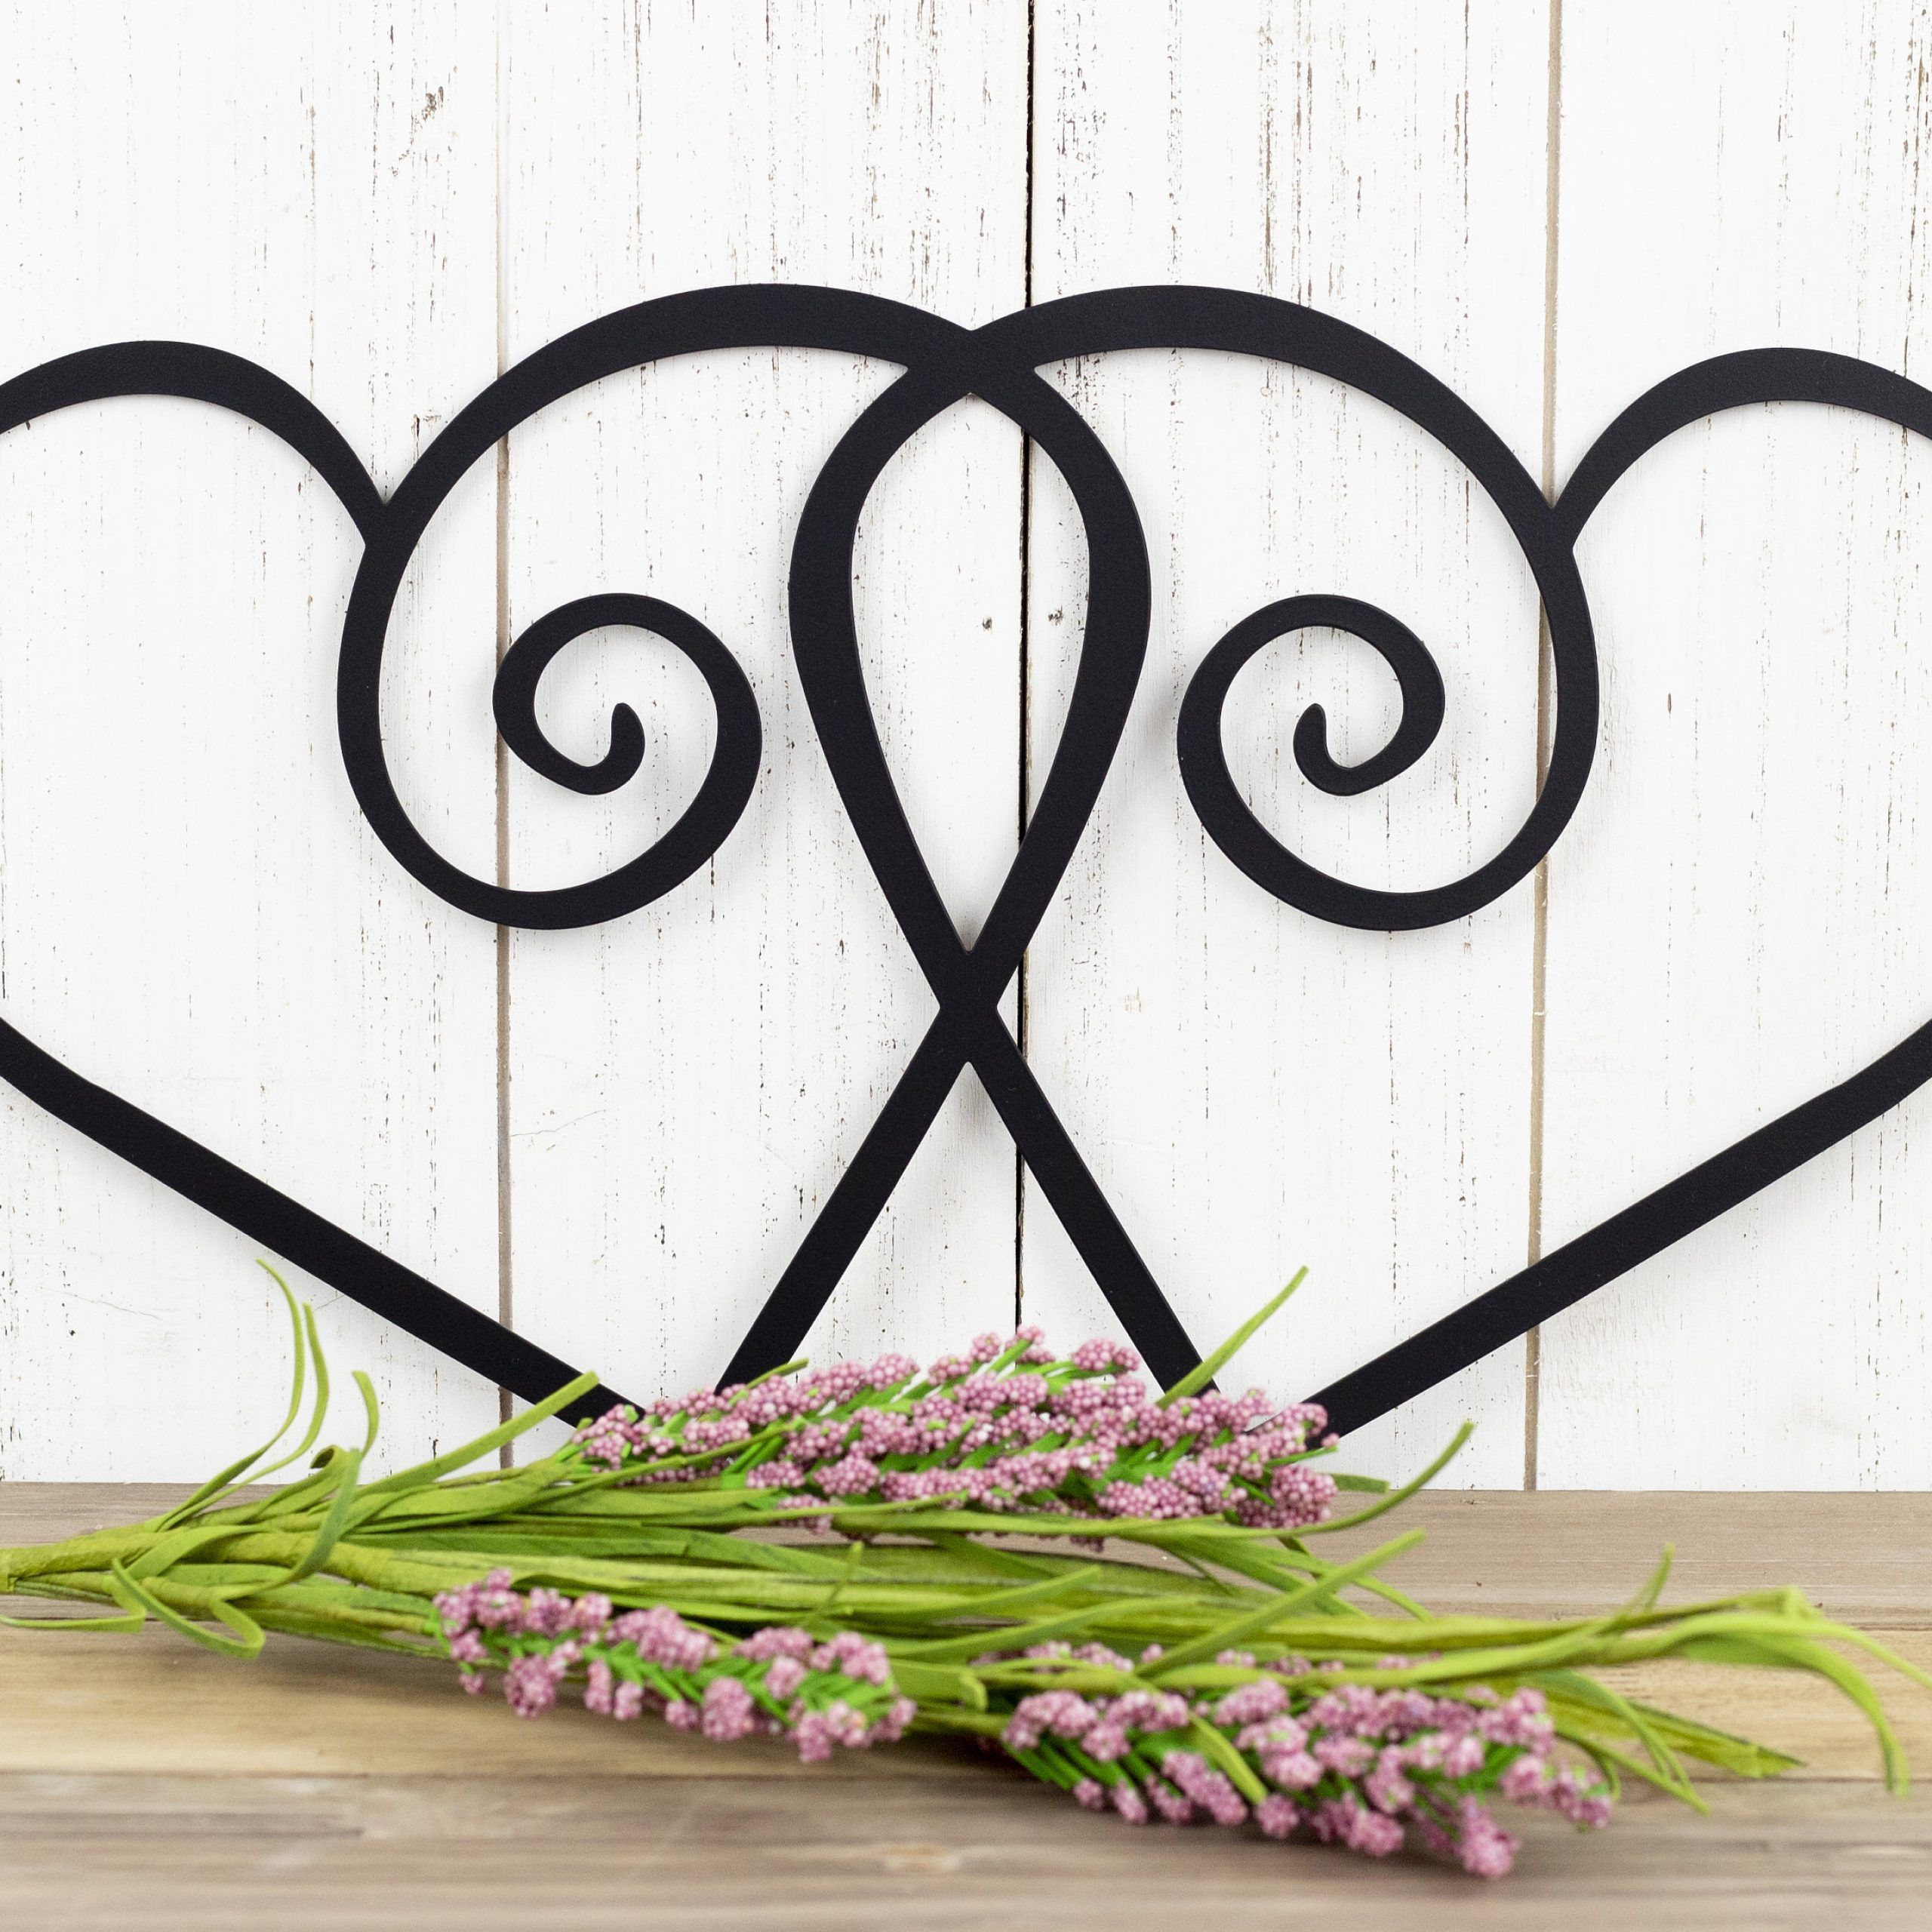 Well Liked Matte Blackwall Art Intended For Hearts Metal Wall Art – Black, 15x (View 9 of 15)